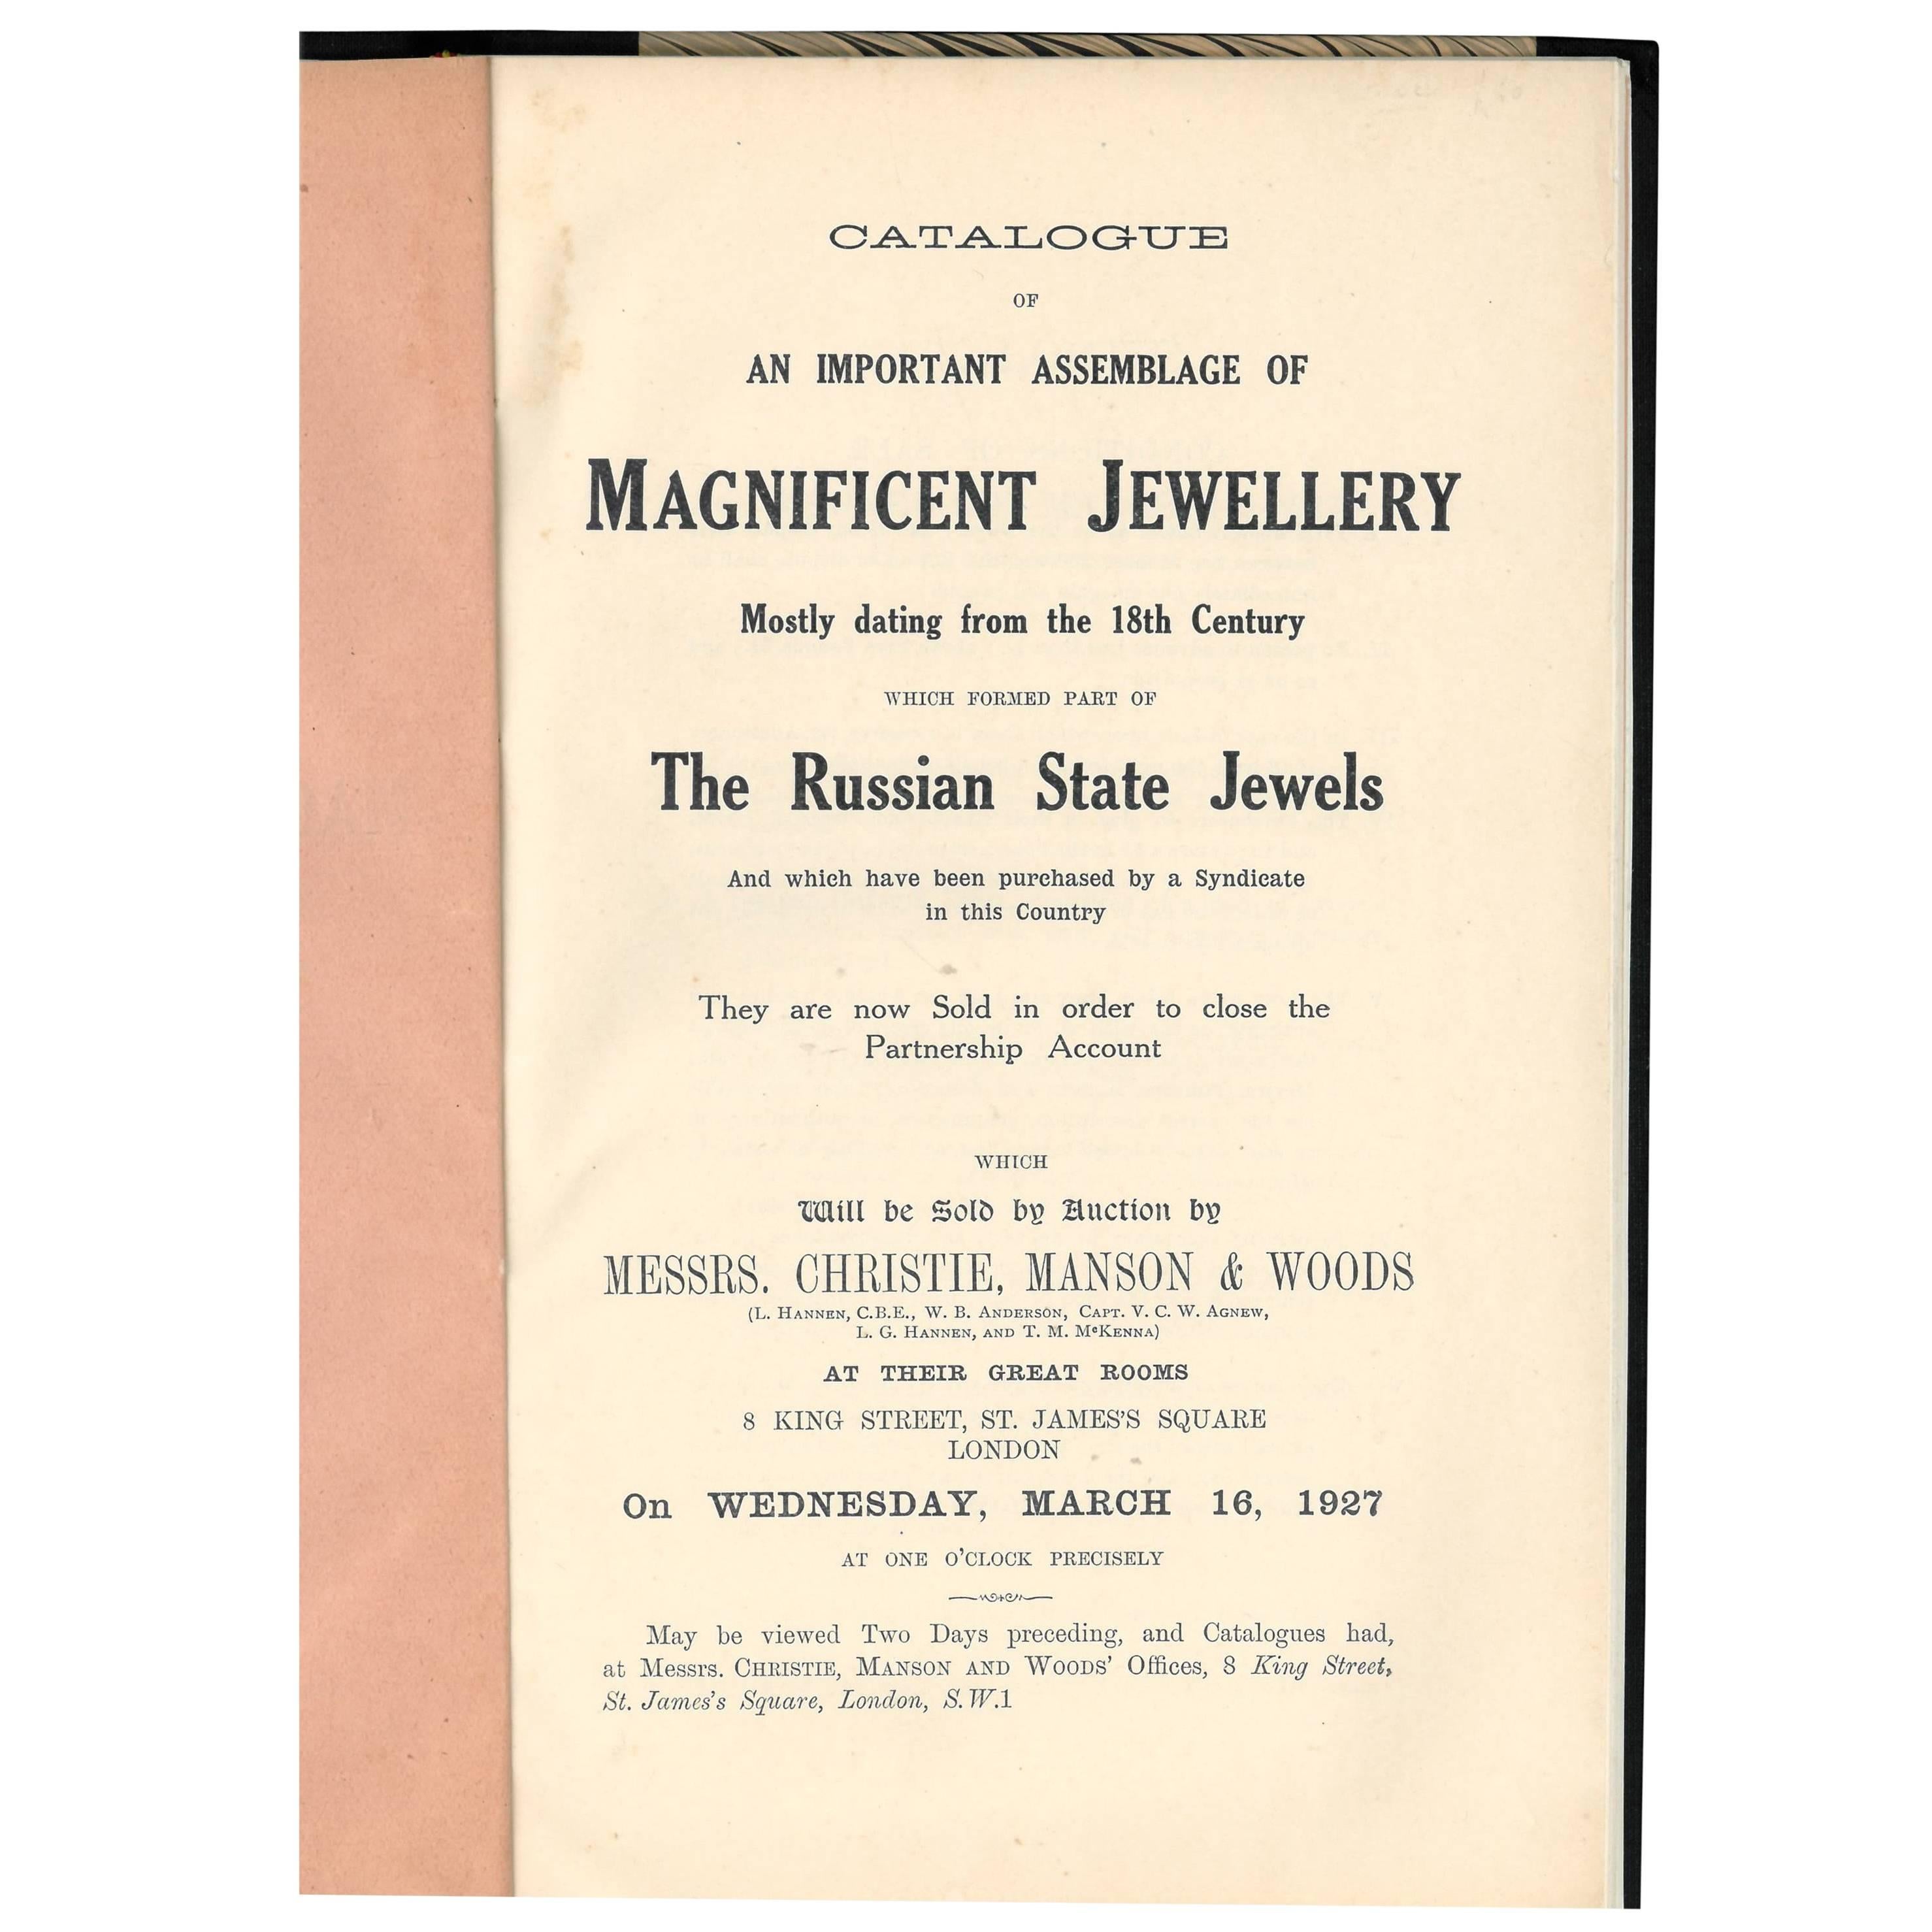 "Collection of Russian State Jewels" Sale Catalogue